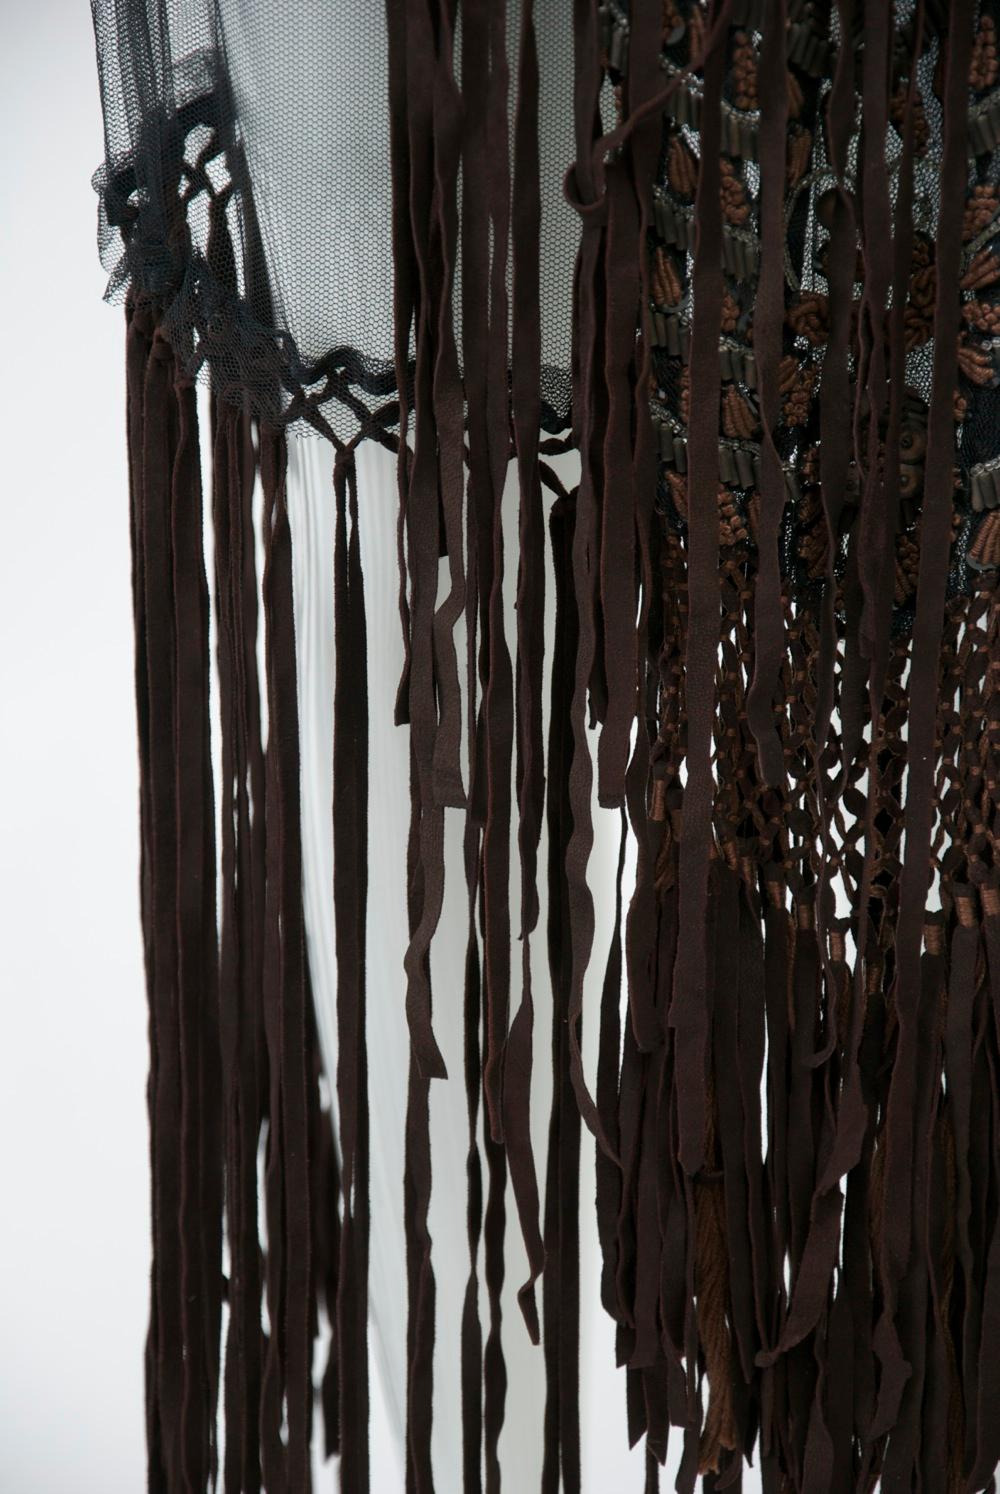 A vintage Fendi piece, c.1970s, composed of an interesting mix of materials. The overskirt features black net suspended from a denim hip band; below the netting is brown suede fringe that descends to the ankles. The centerpiece is a matching fringed